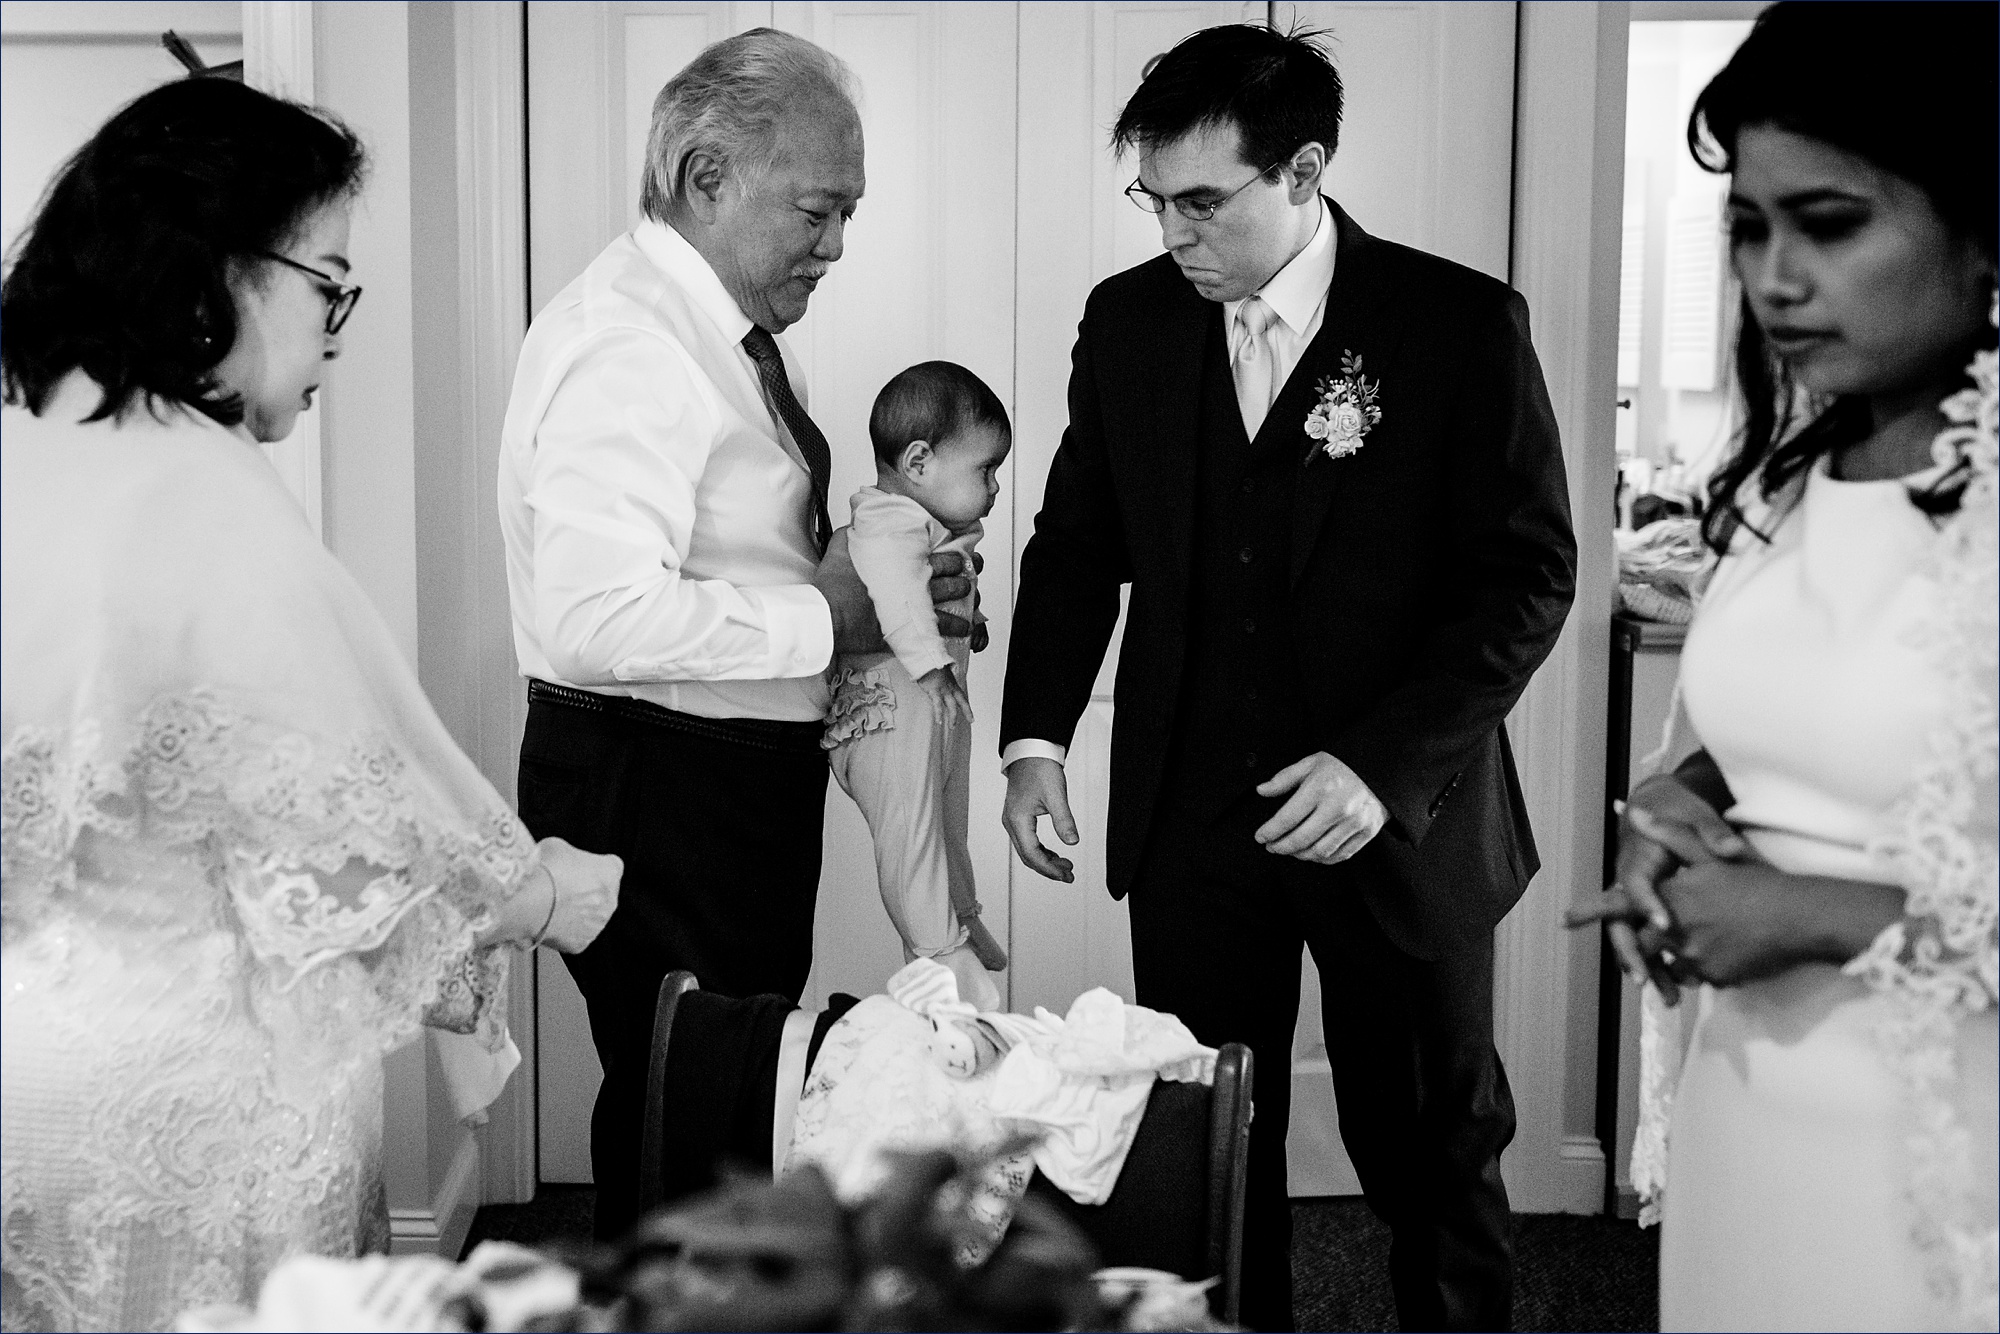 What to do with the granddaughter on the wedding day